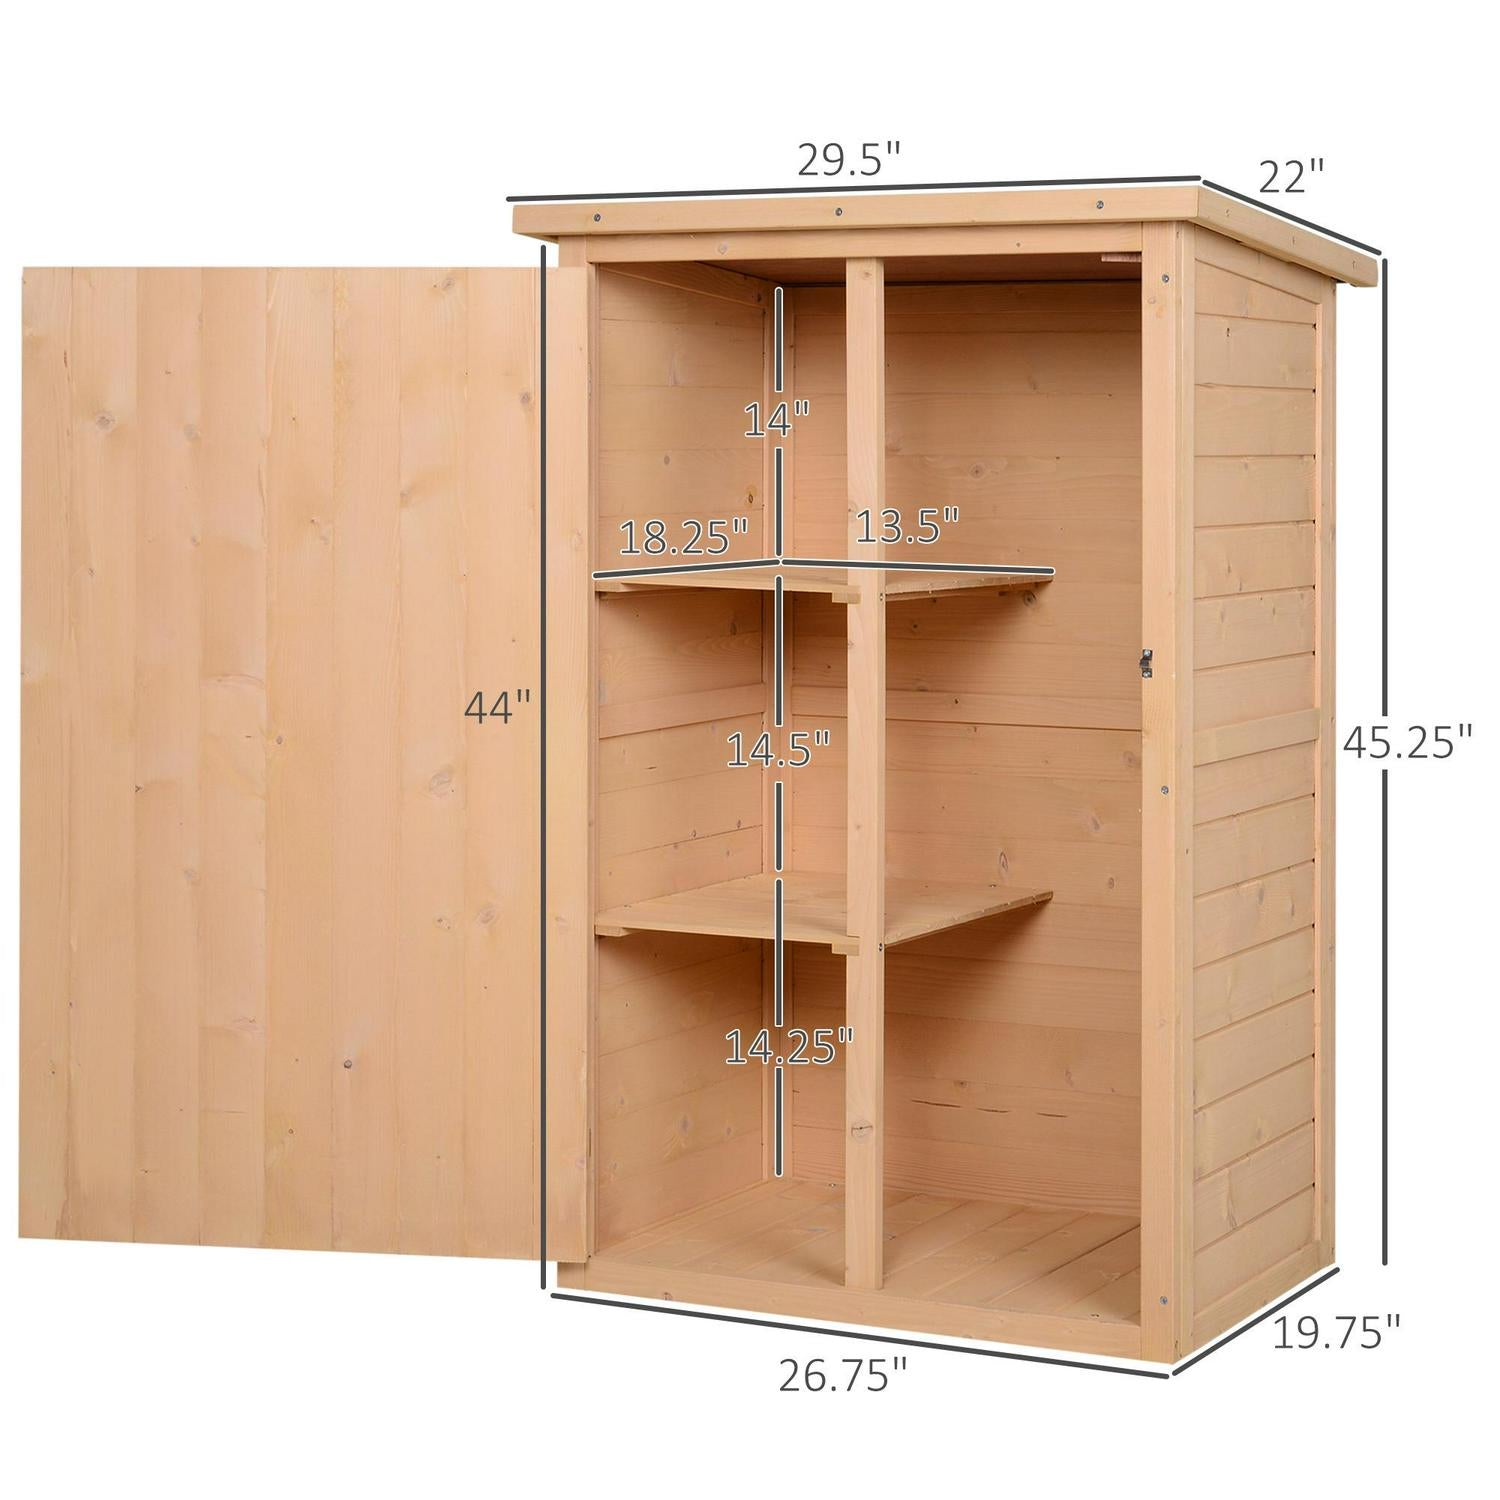 Small Fir Wood Garden Storage Shed With Shelves 1.8 X 2.4ft